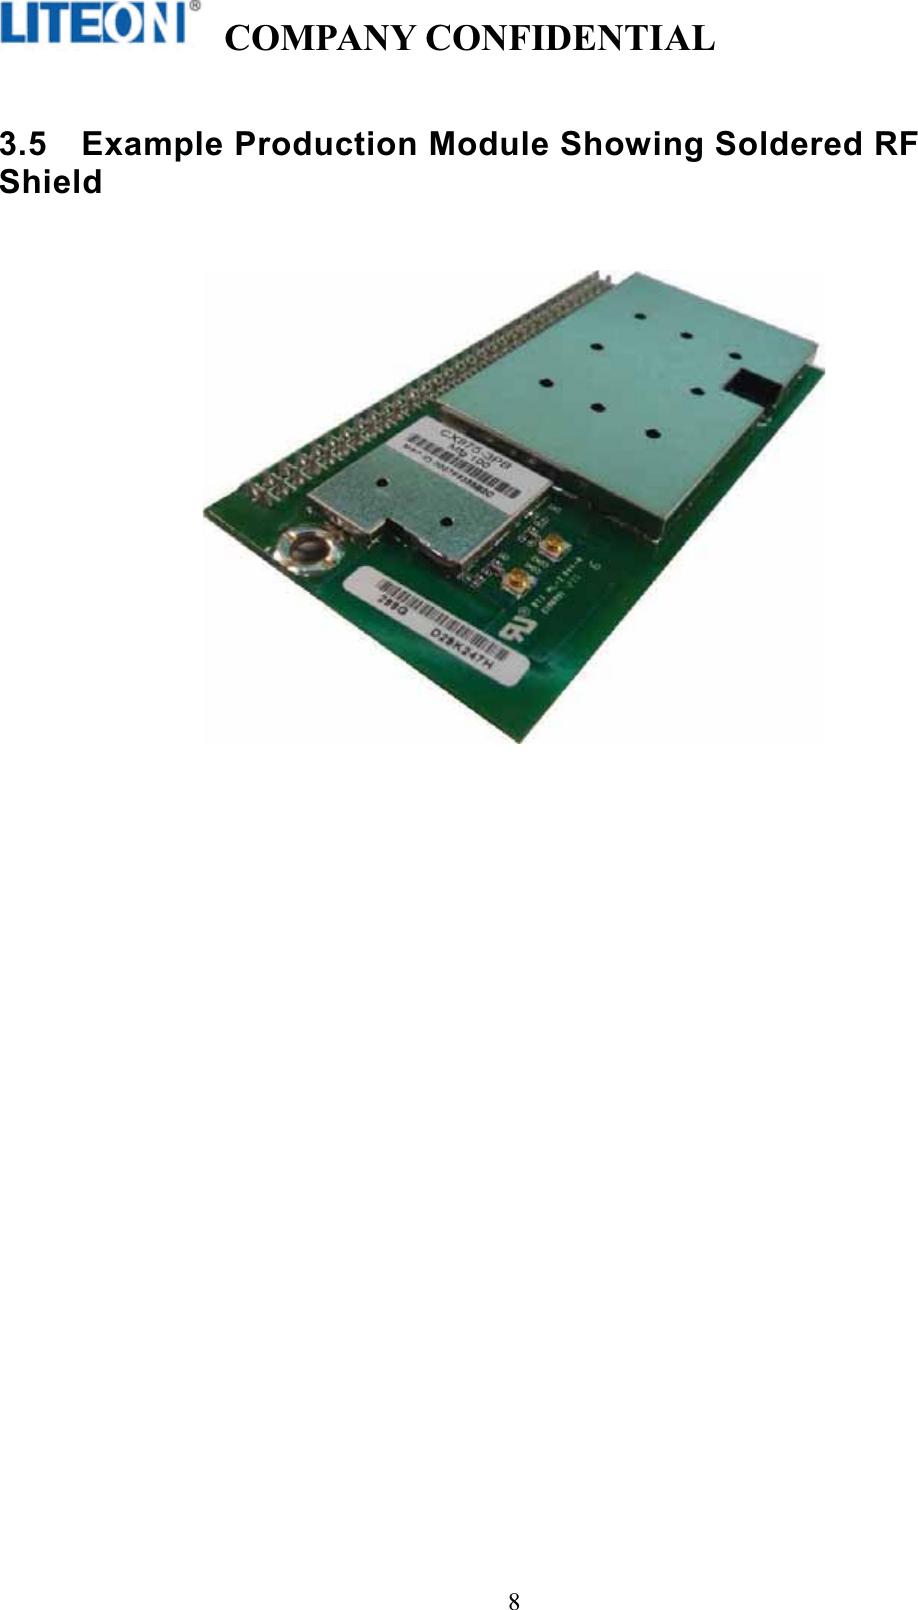   COMPANY CONFIDENTIAL   !83.5  Example Production Module Showing Soldered RF Shield 